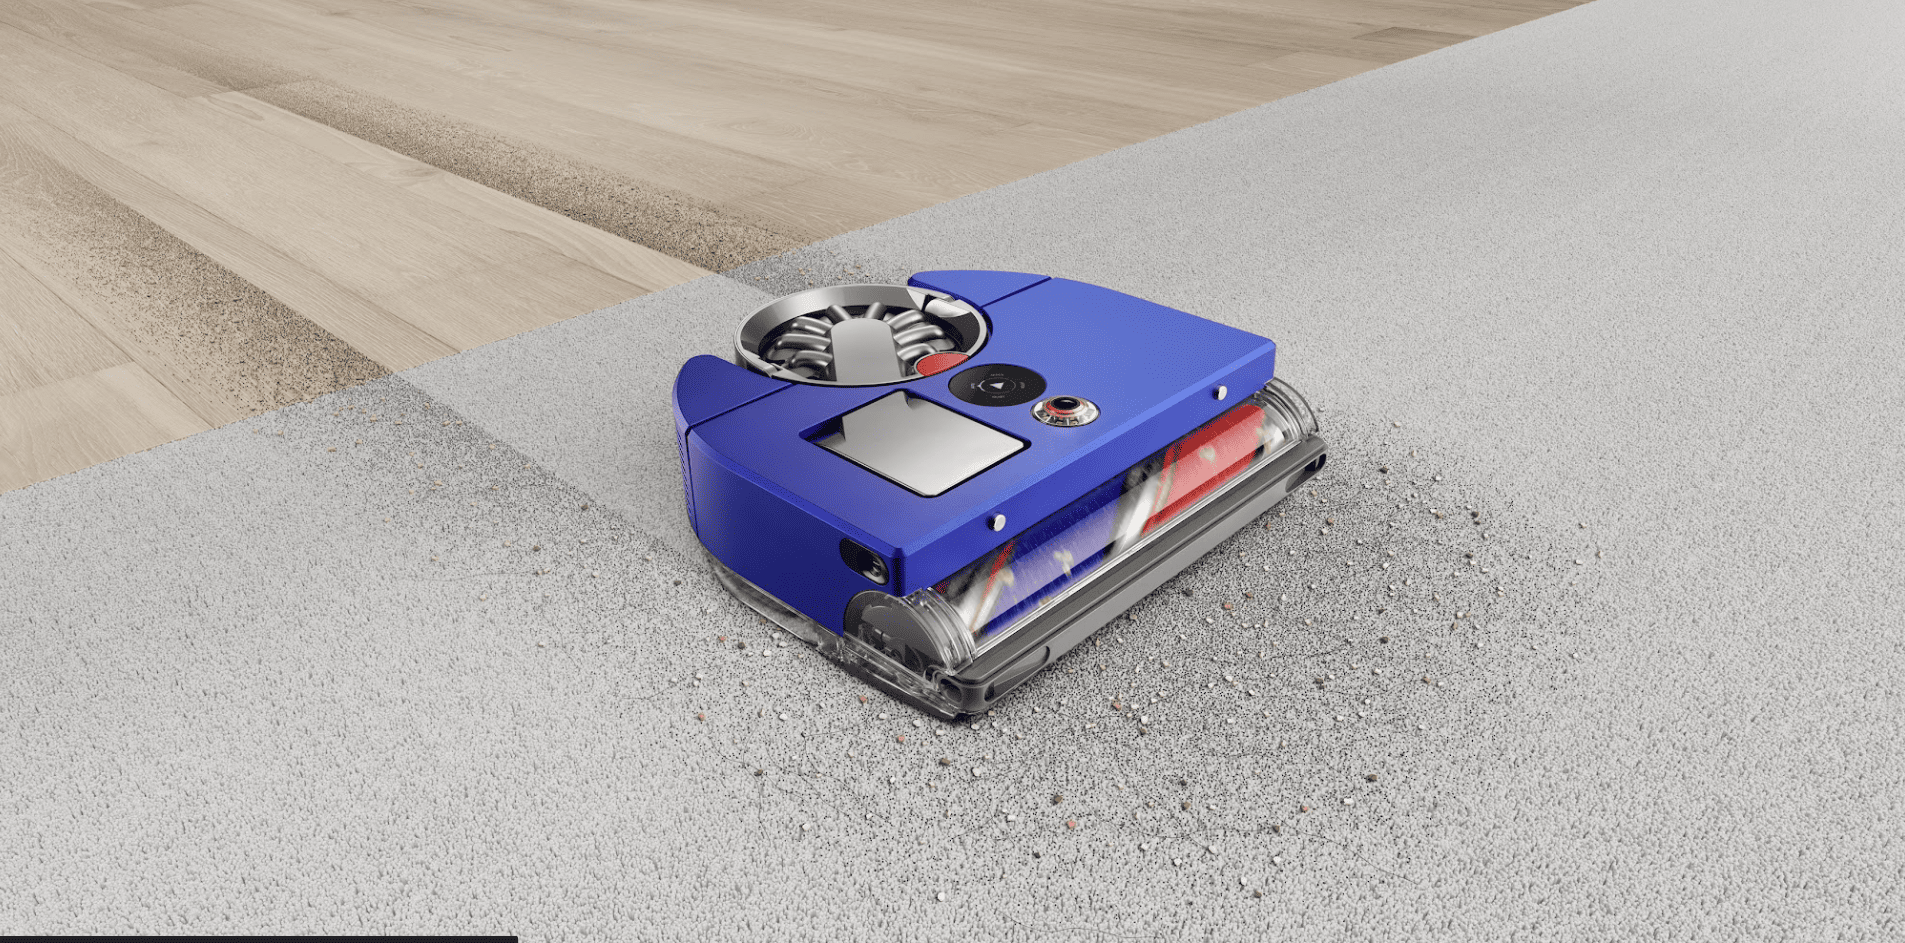 Dyson launches a new, most powerful robot vacuum cleaner and Australia is the first market in the world to receive one